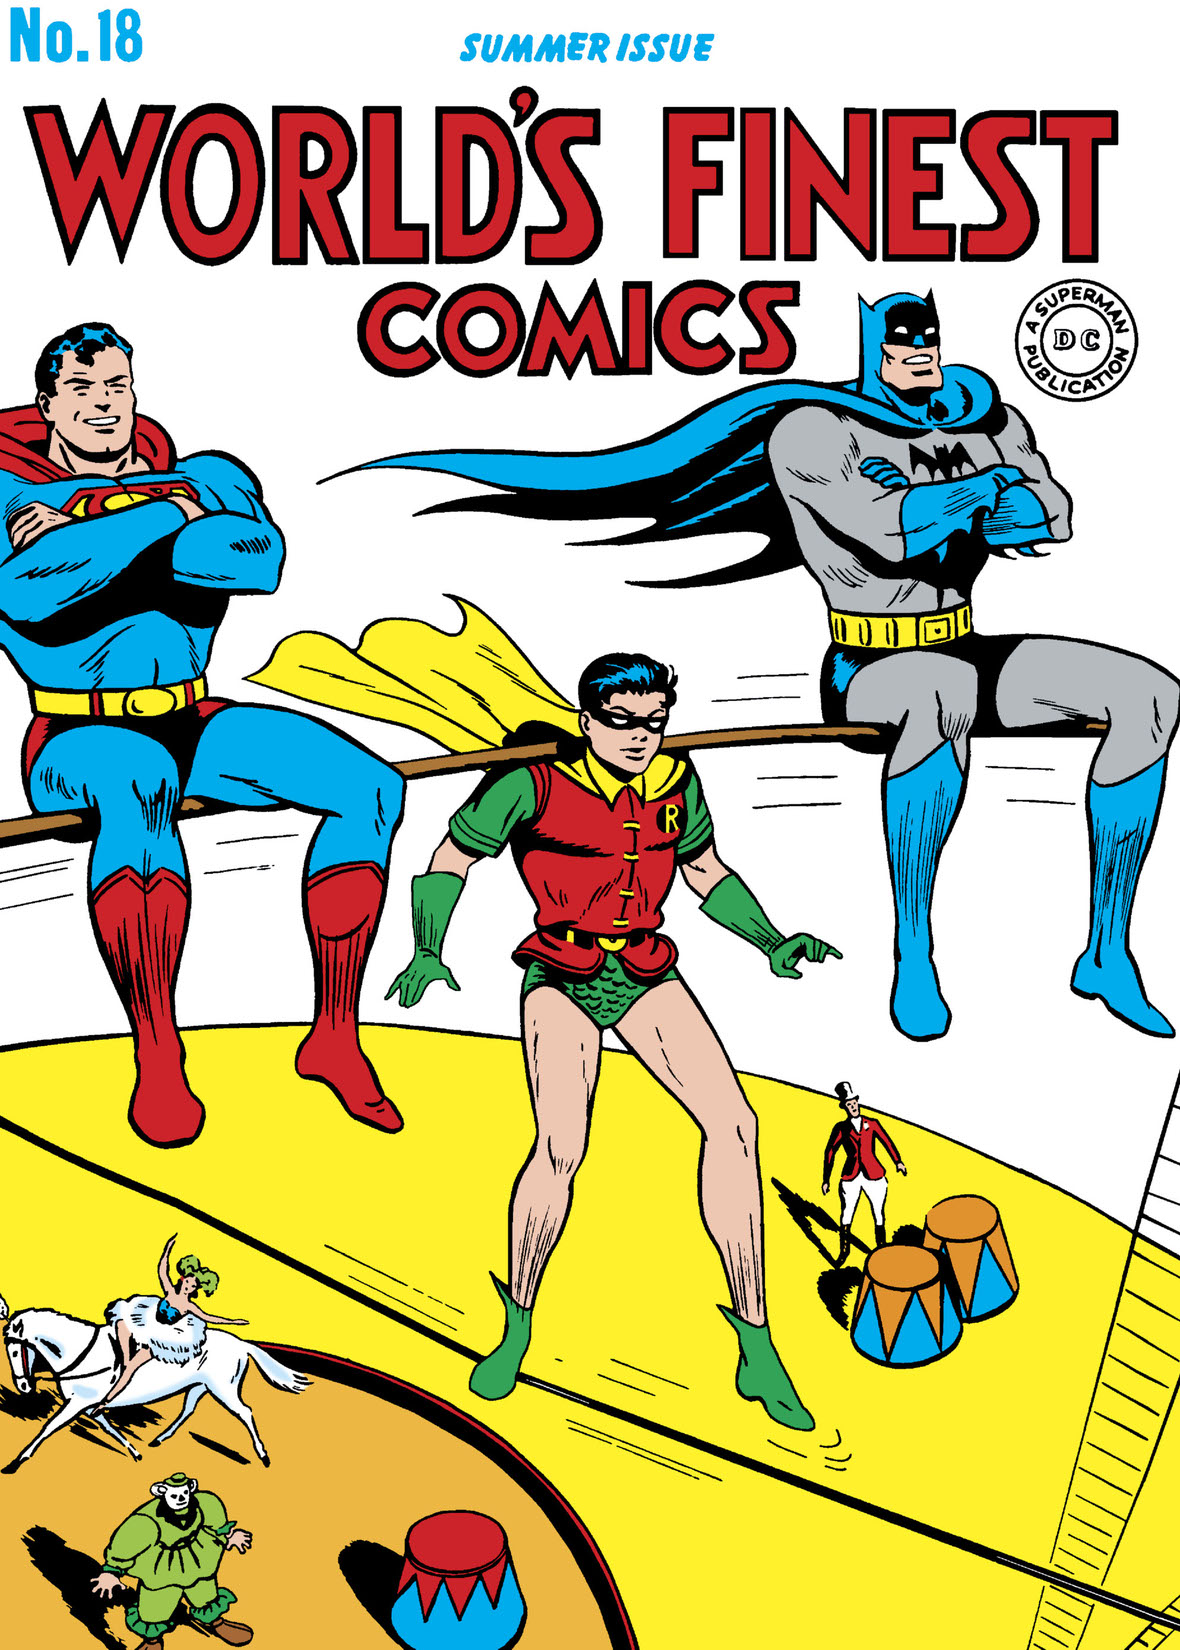 World's Finest Comics (1941-) #18 preview images